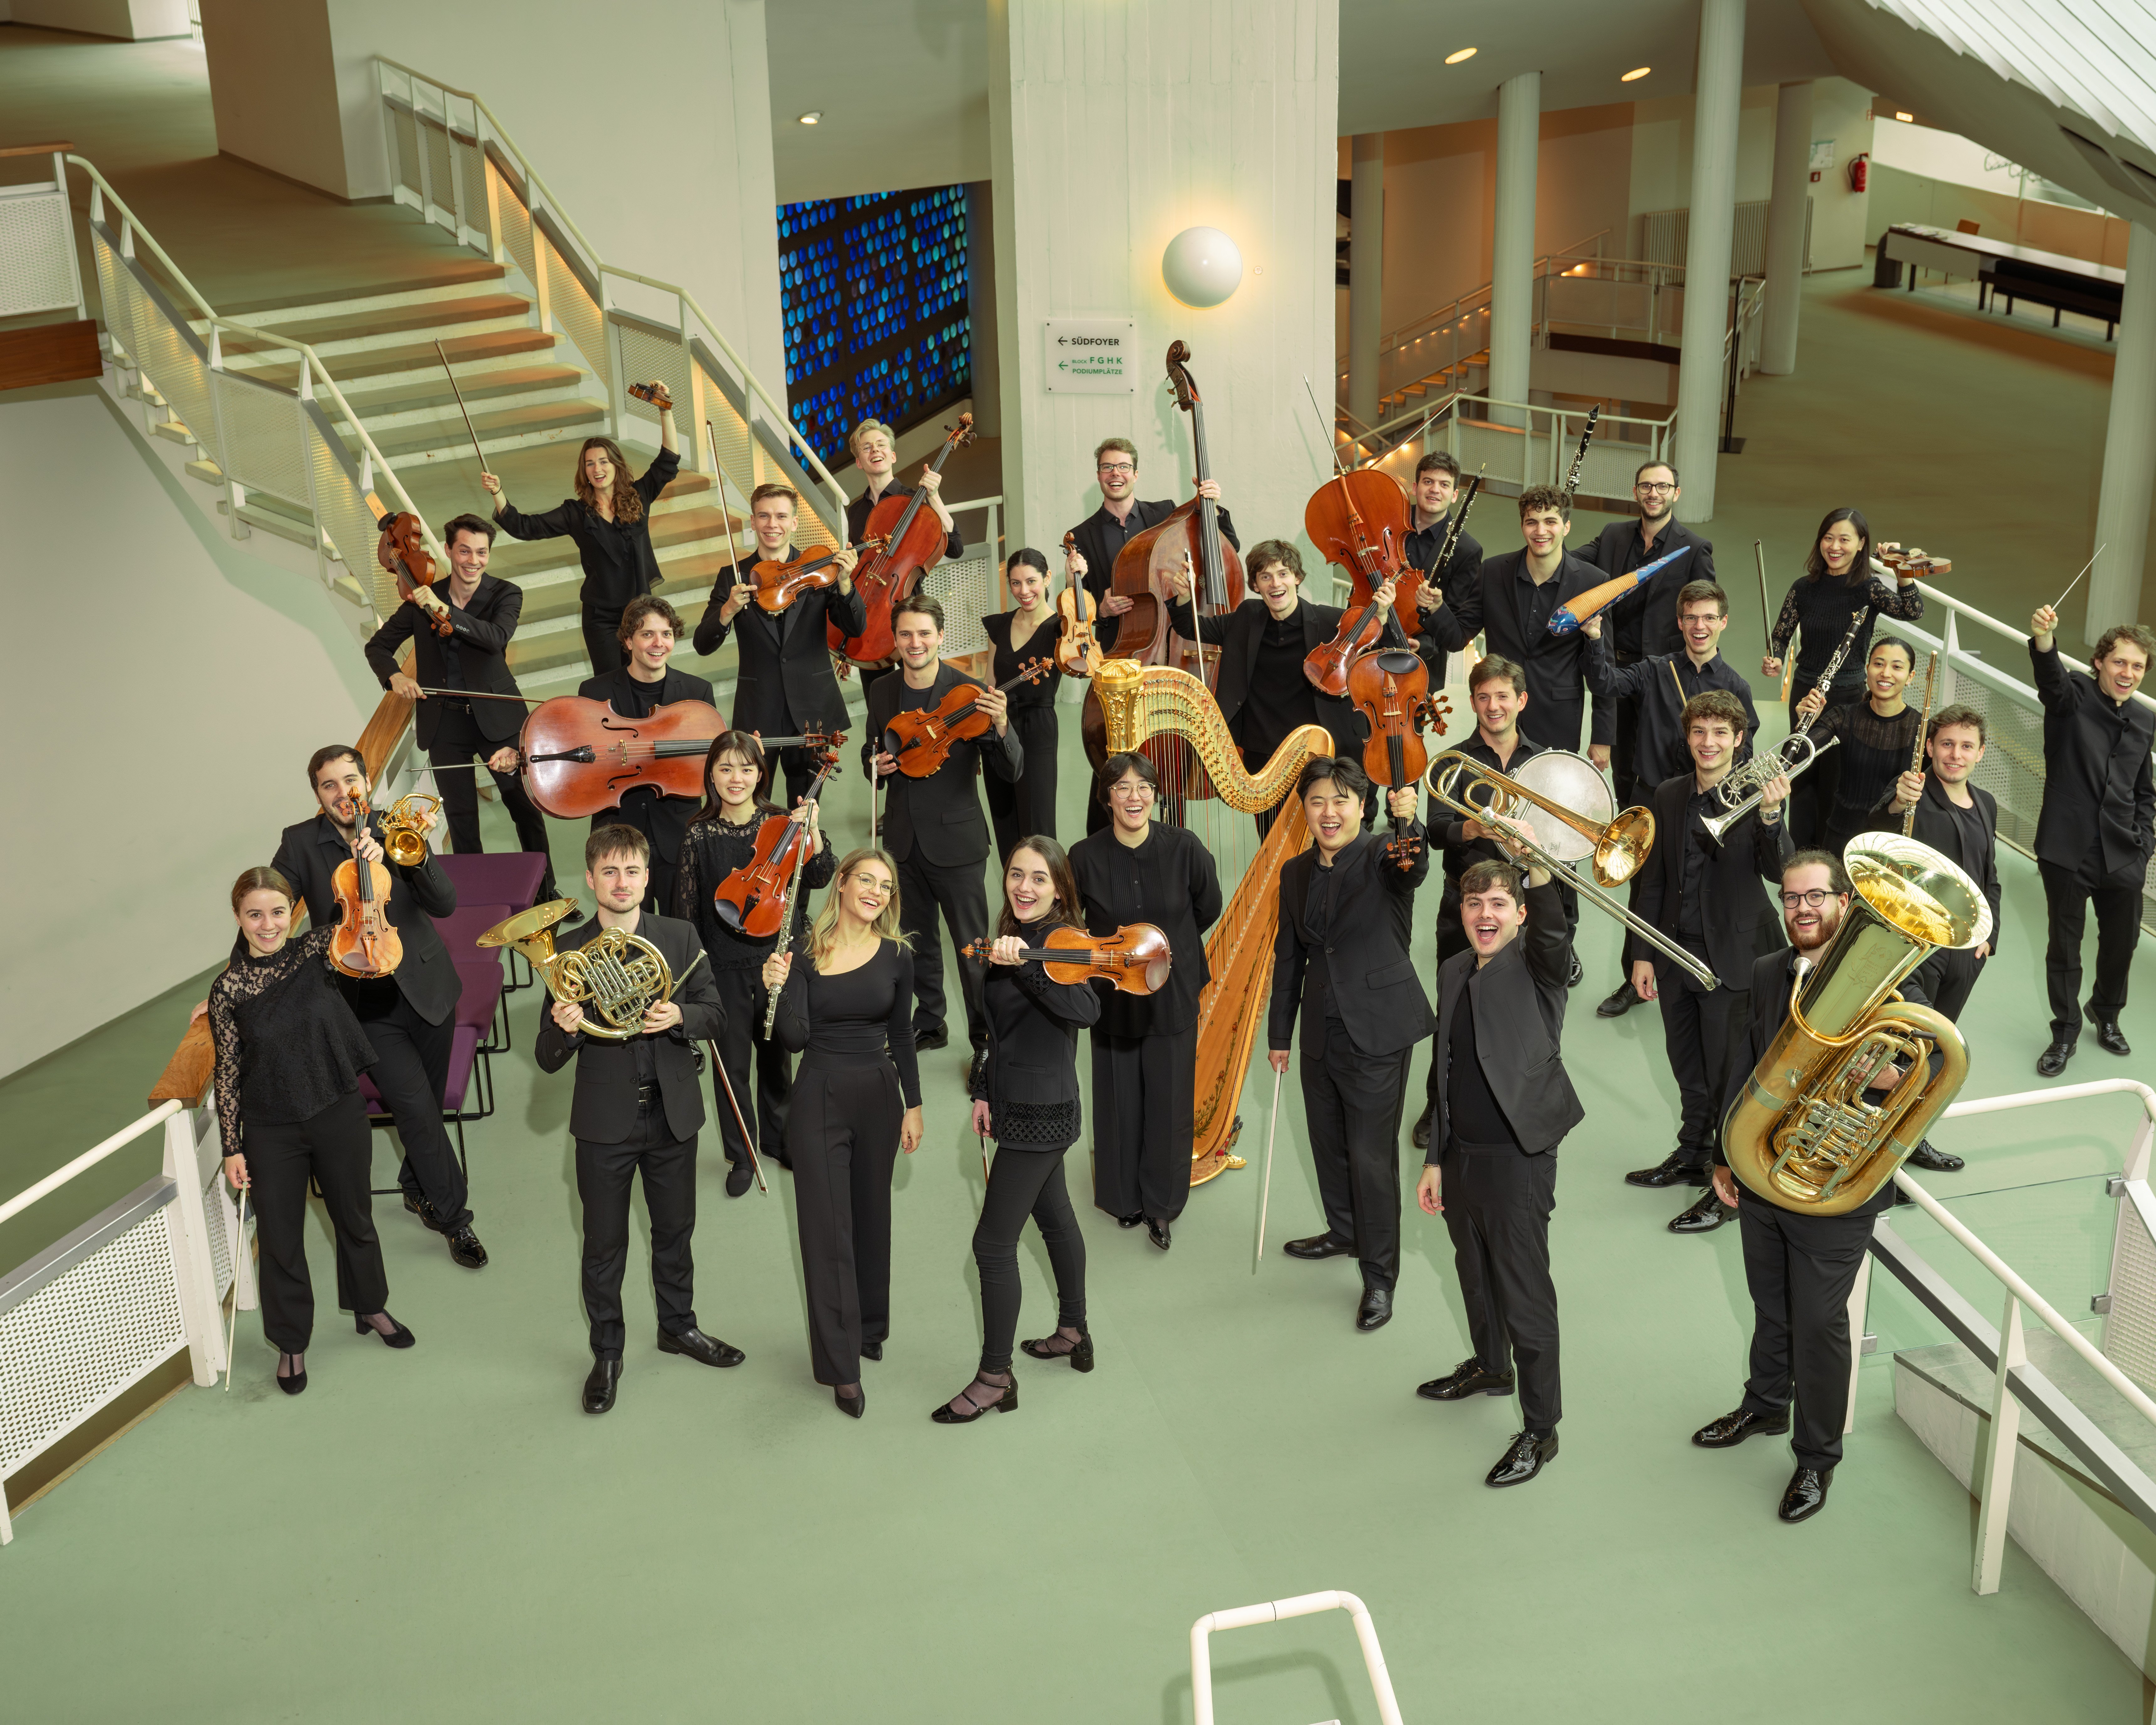 Group photo with musicians with their instruments in the foyer of the Philharmonie Berlin